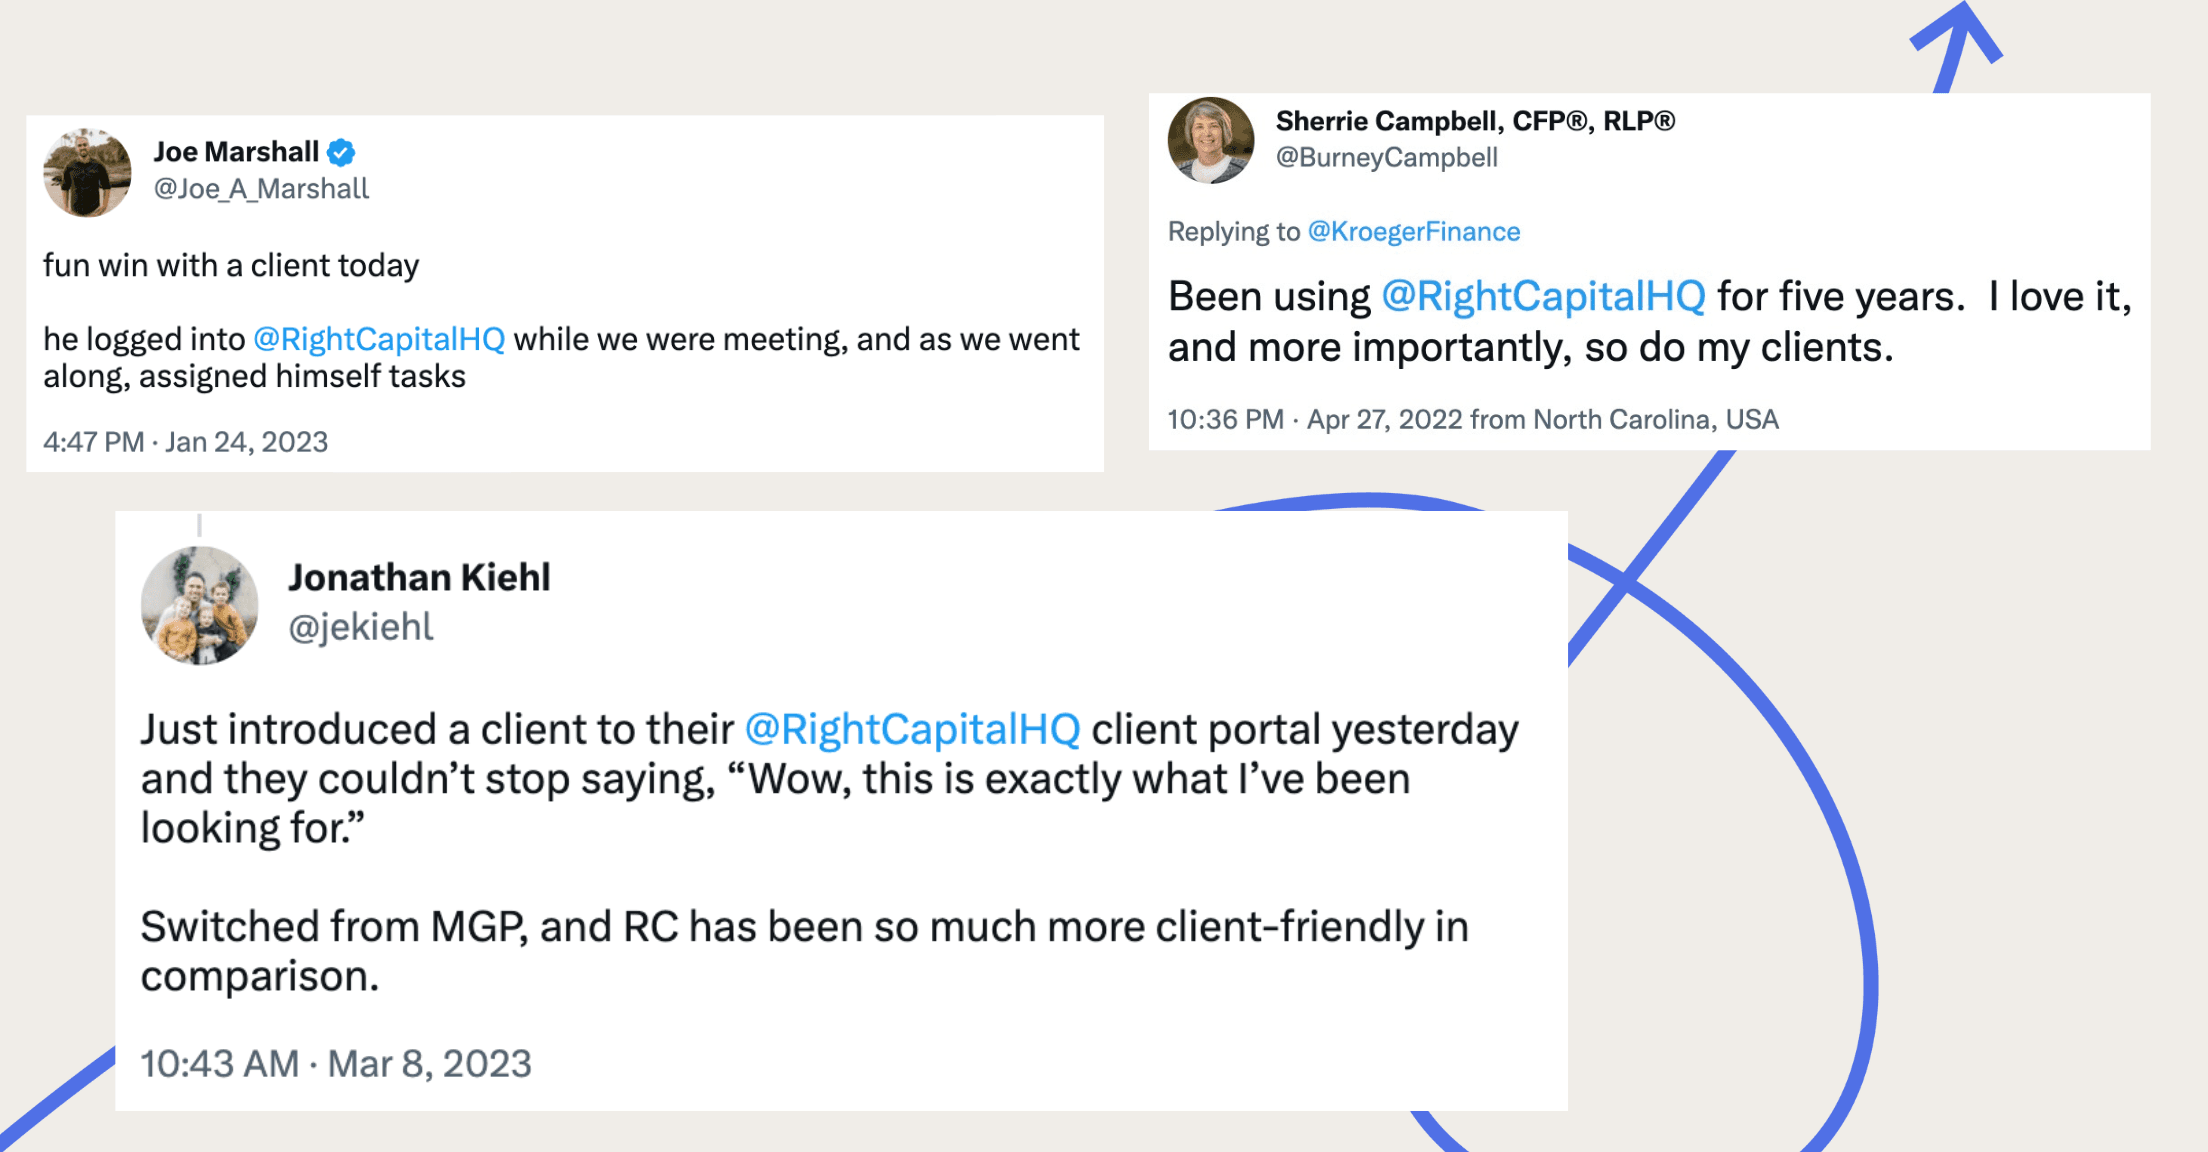 Tweets about how much advisors' clients love RightCapital